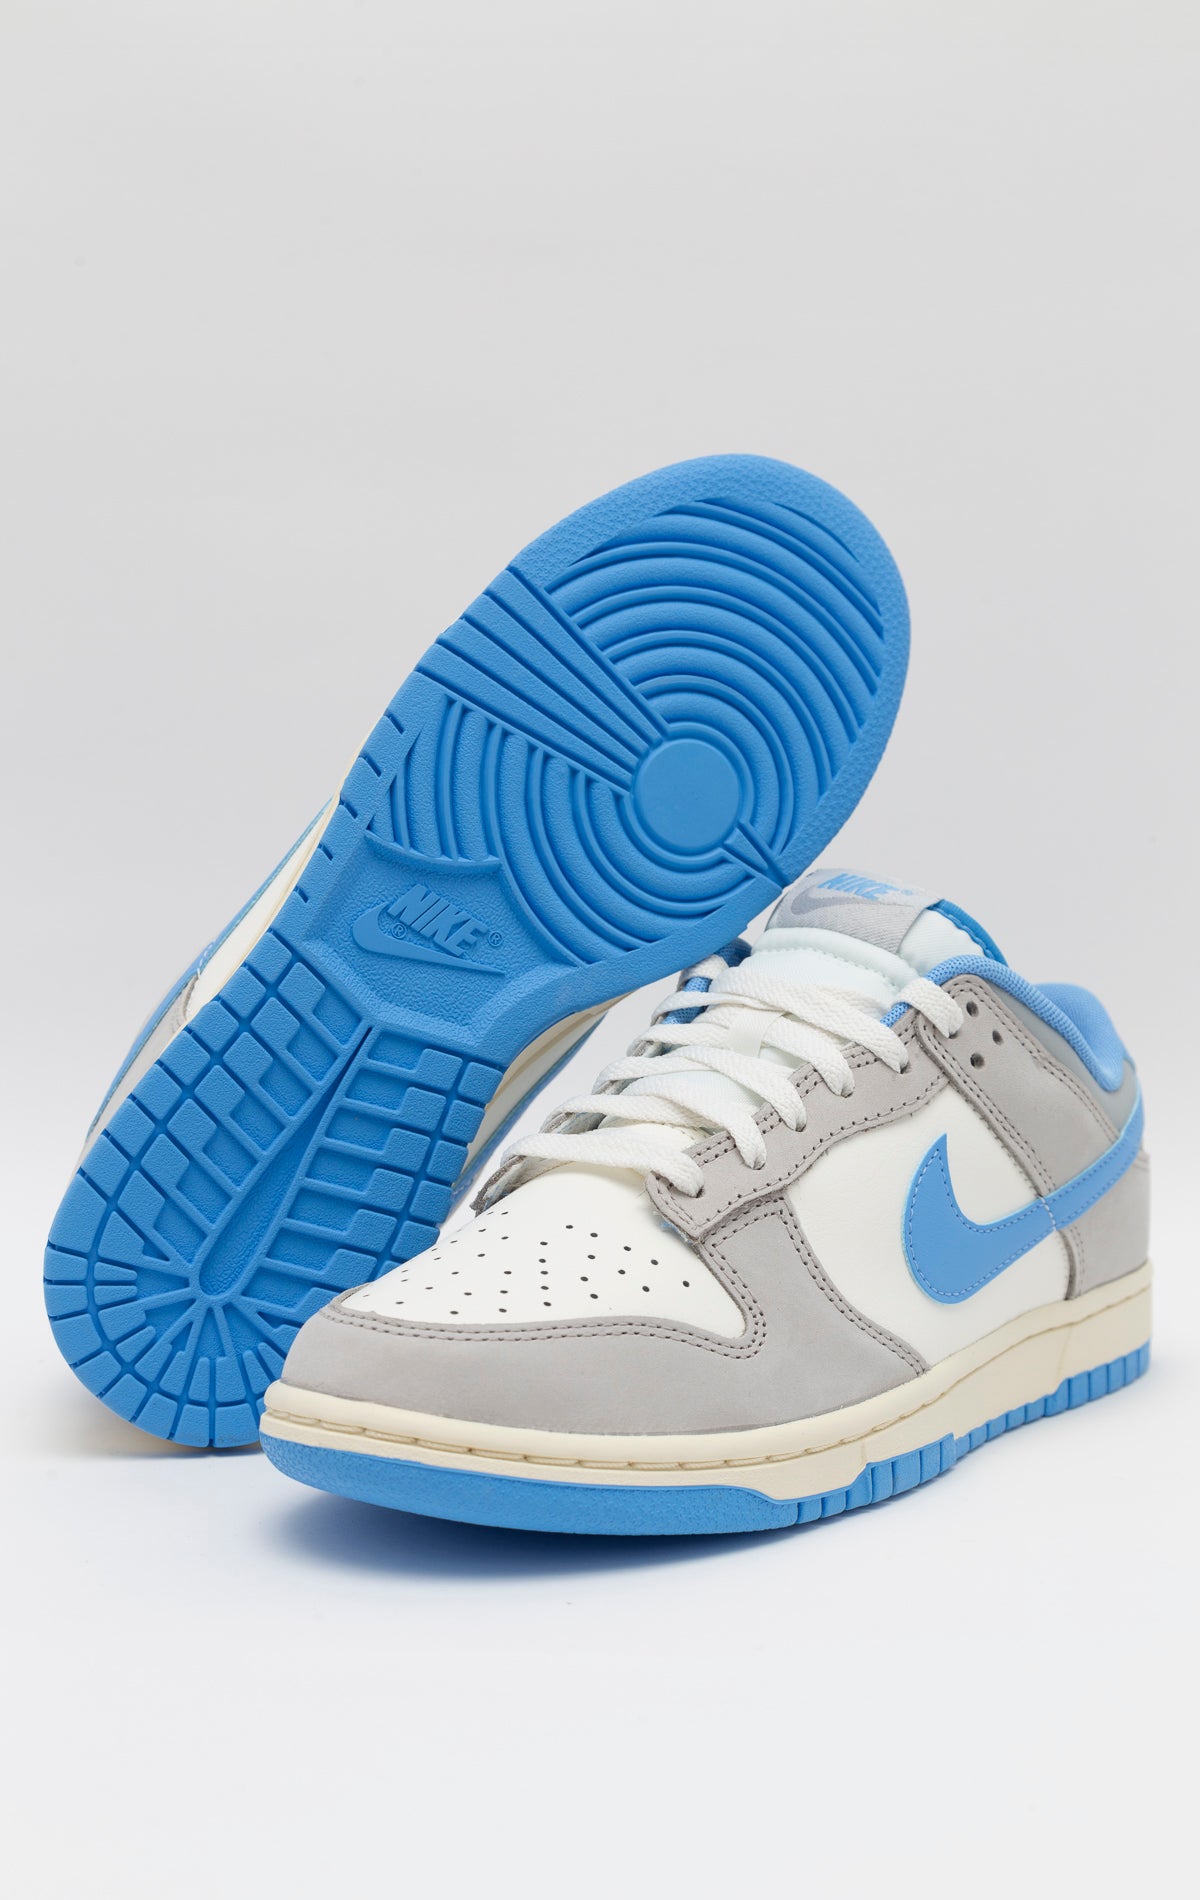 The Nike Dunk Low Athletic Department University Blue showcases a Light Smoke Gray upper with University Blue detailing. Made with high-quality leather and suede, it boasts both durability and fashion in a traditional low-top design. The padded collar, cushioned insole, and pivot point tread on the rubber outsole guarantee comfort. The Light Iron Ore EVA foam midsole offers impact defense. Iconic Swoosh logos can be found on both sides, and the tongue and heel tab feature Nike branding.